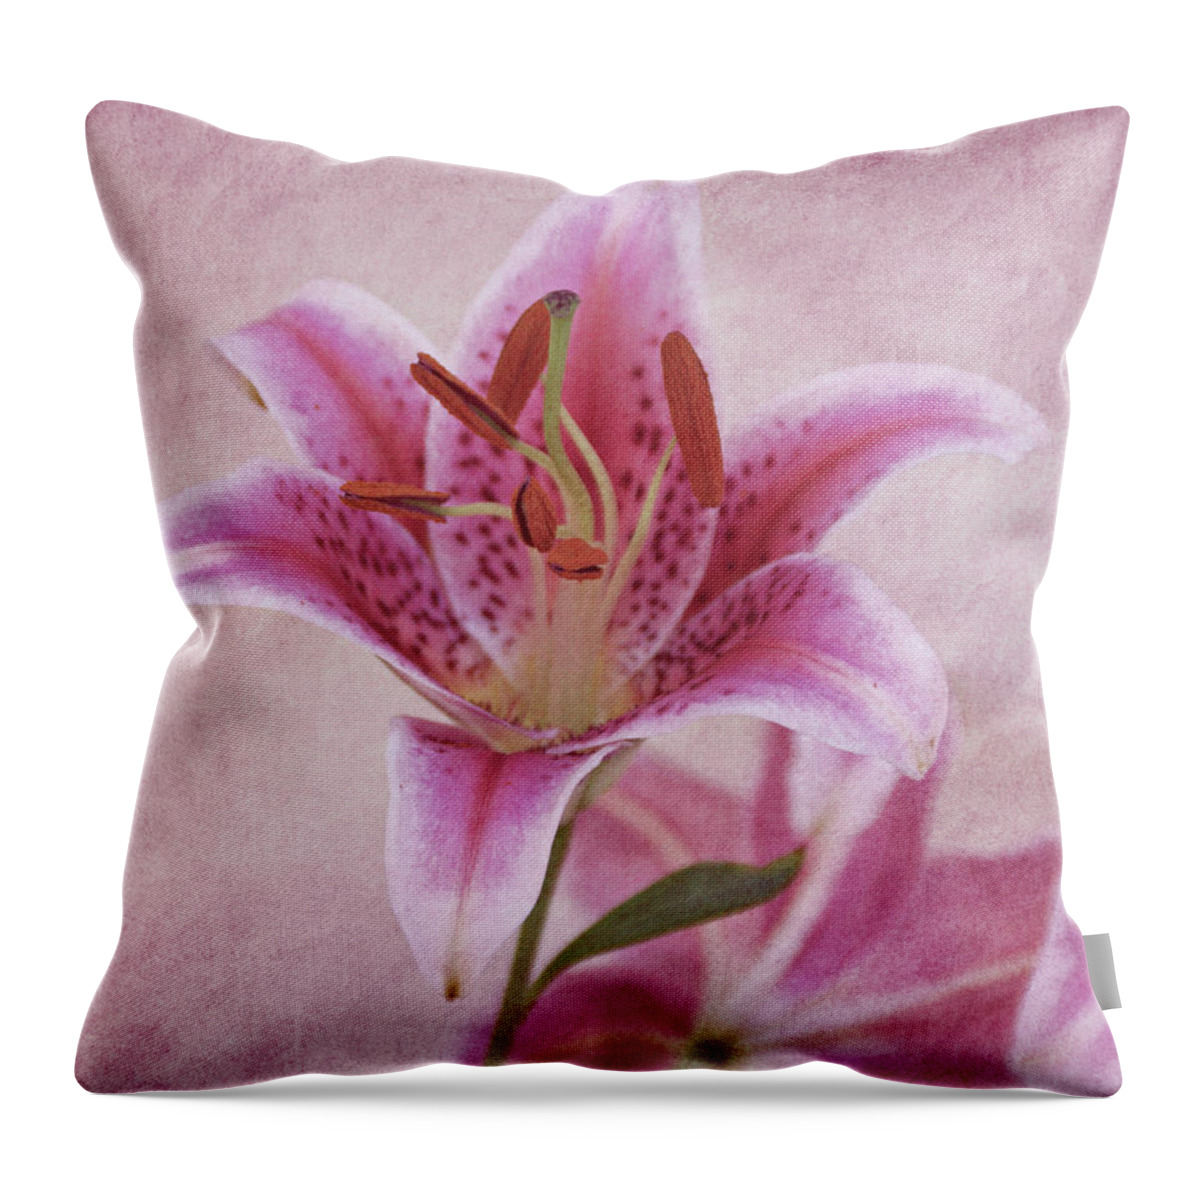 Lily Throw Pillow featuring the photograph Stargazer Lily by Sandy Keeton